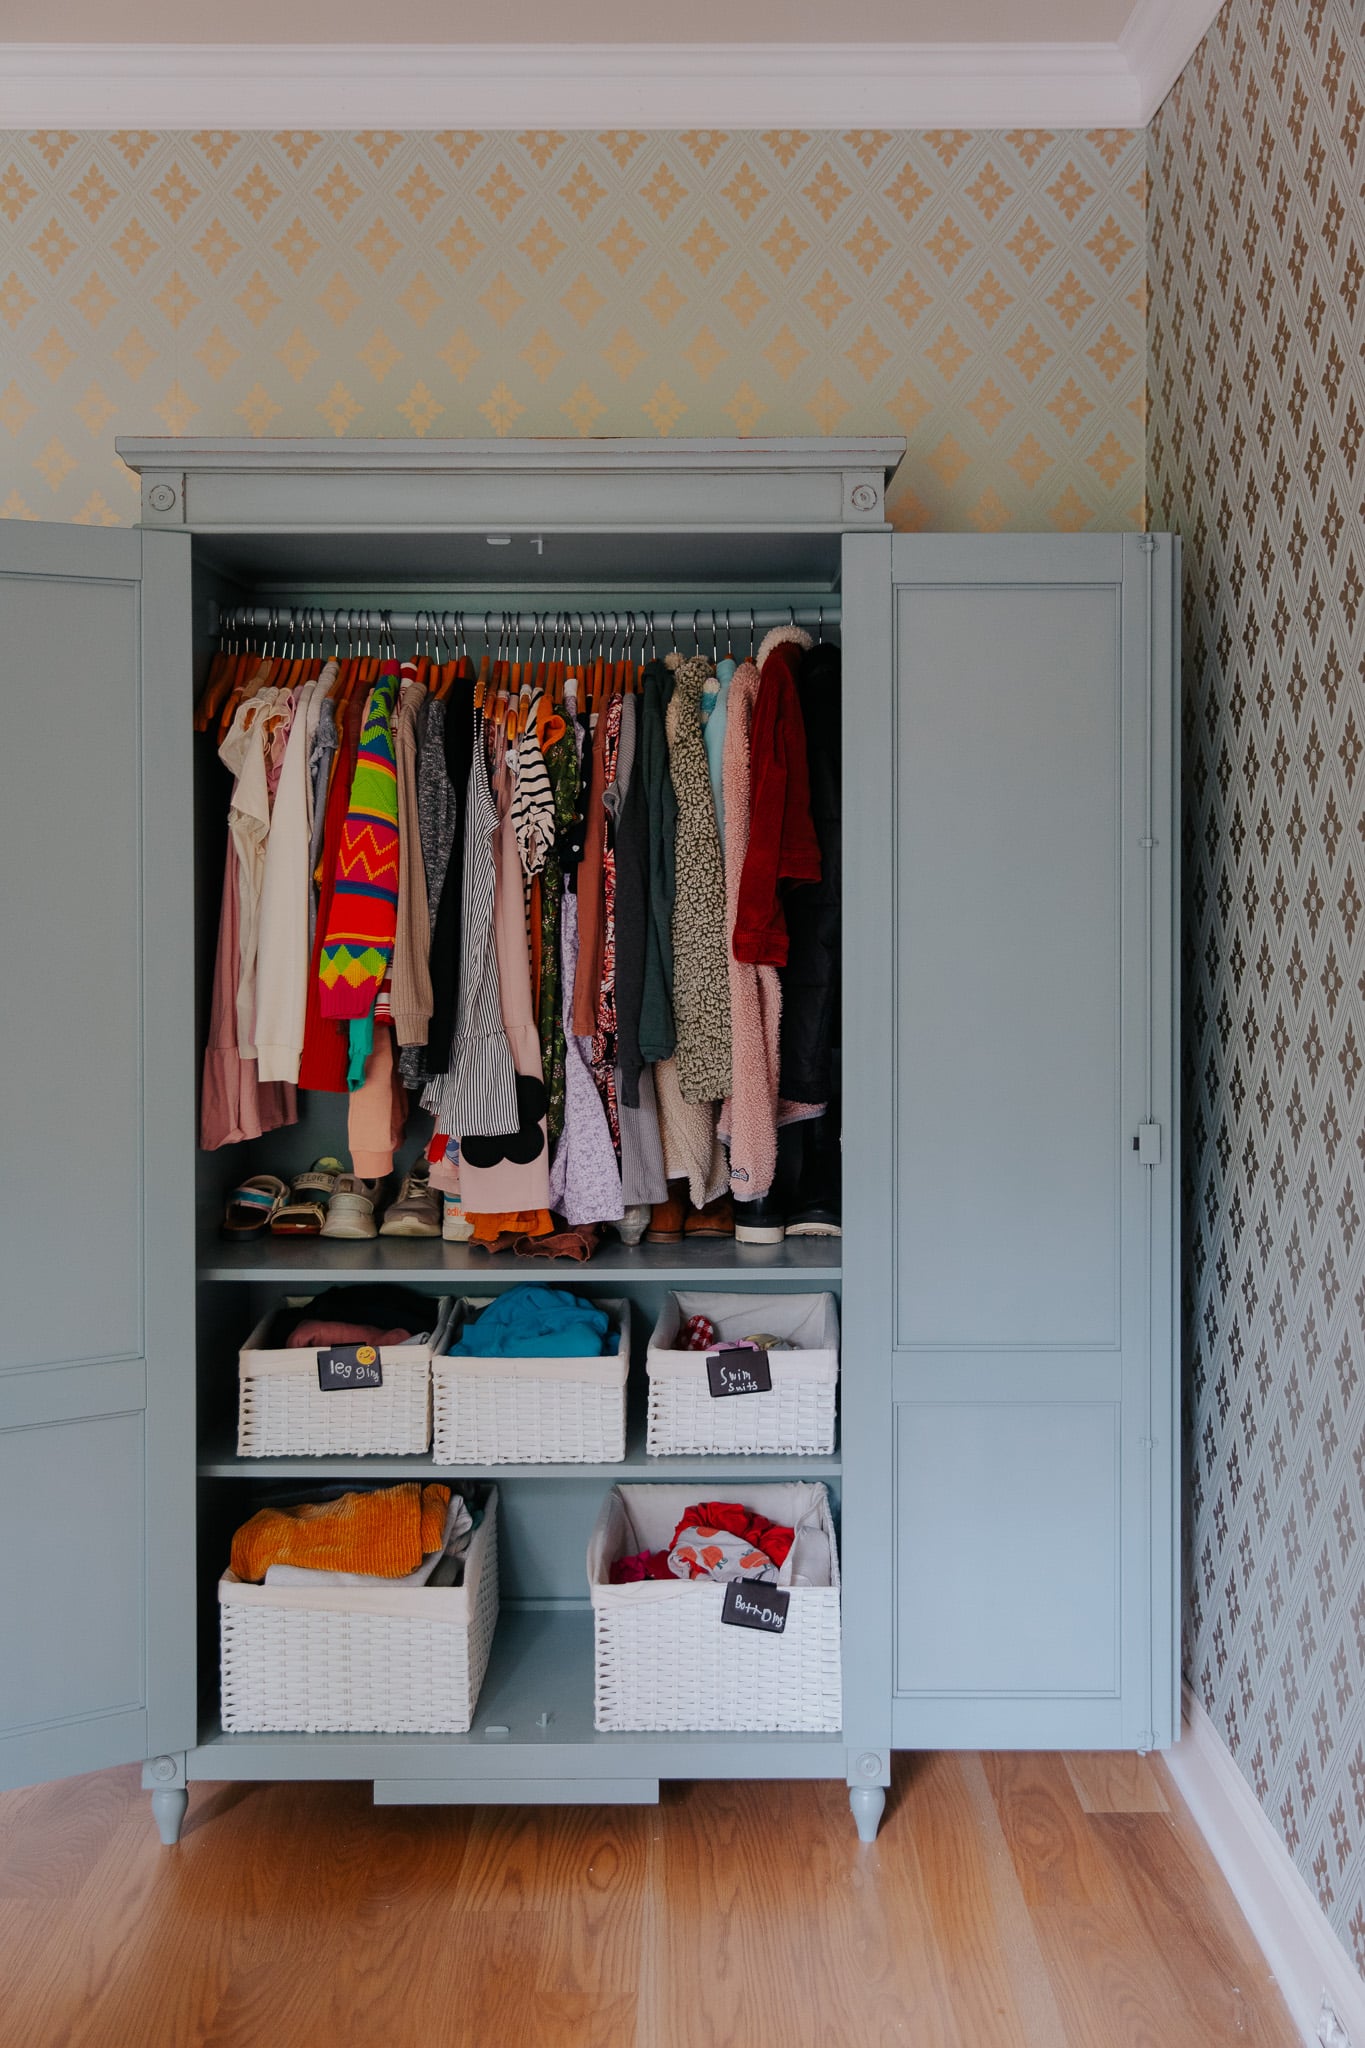 Chris Loves Julia | Blue painted armoire filled with clothes in a child's bedroom